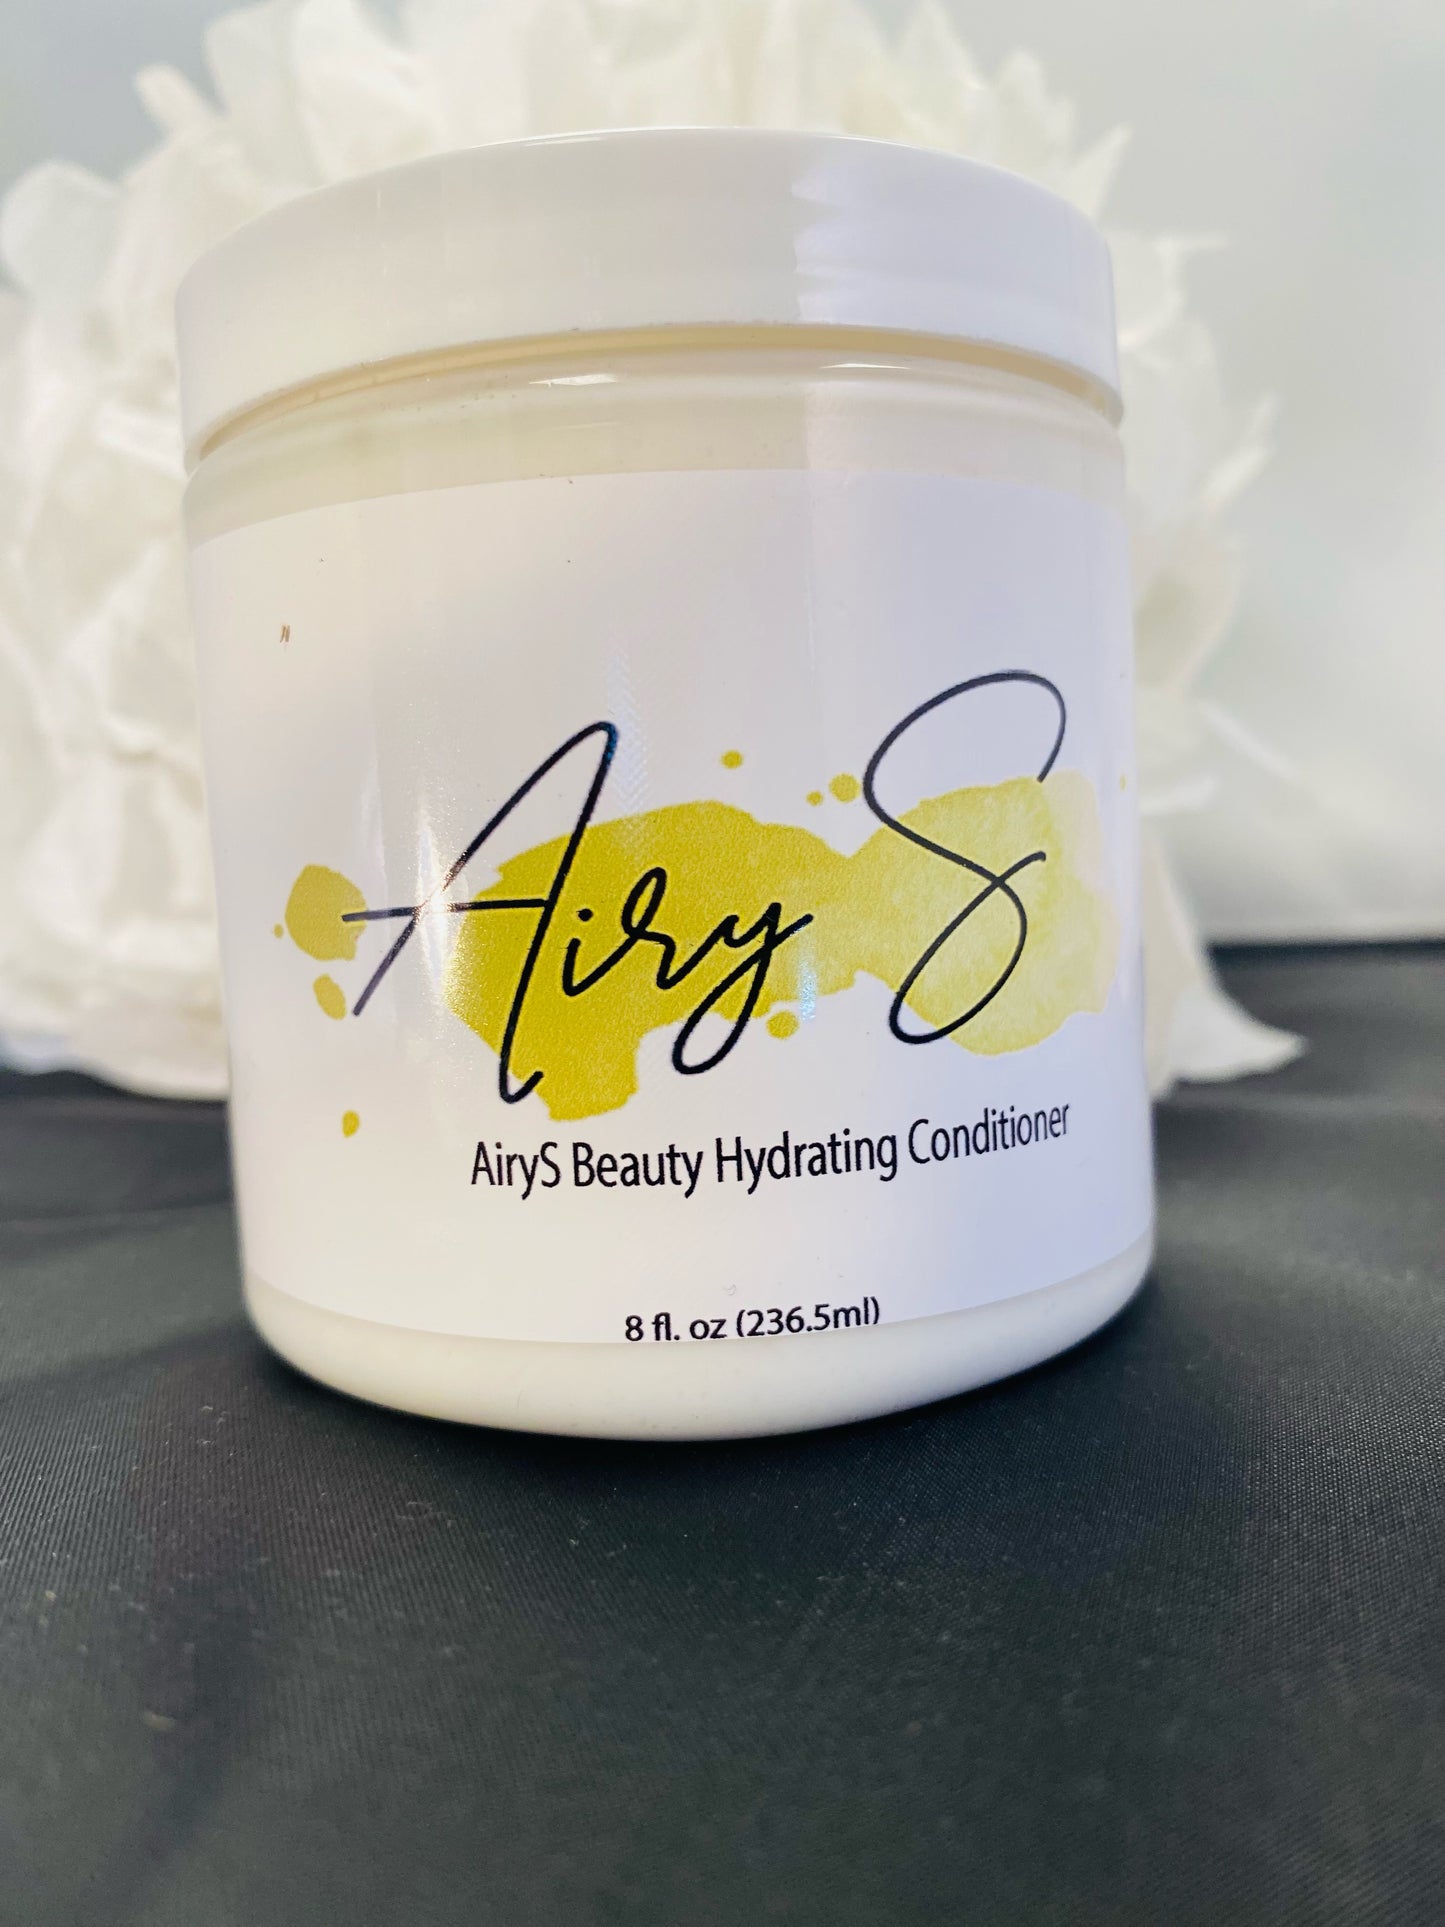 AiryS Beauty Hydrating Conditioner